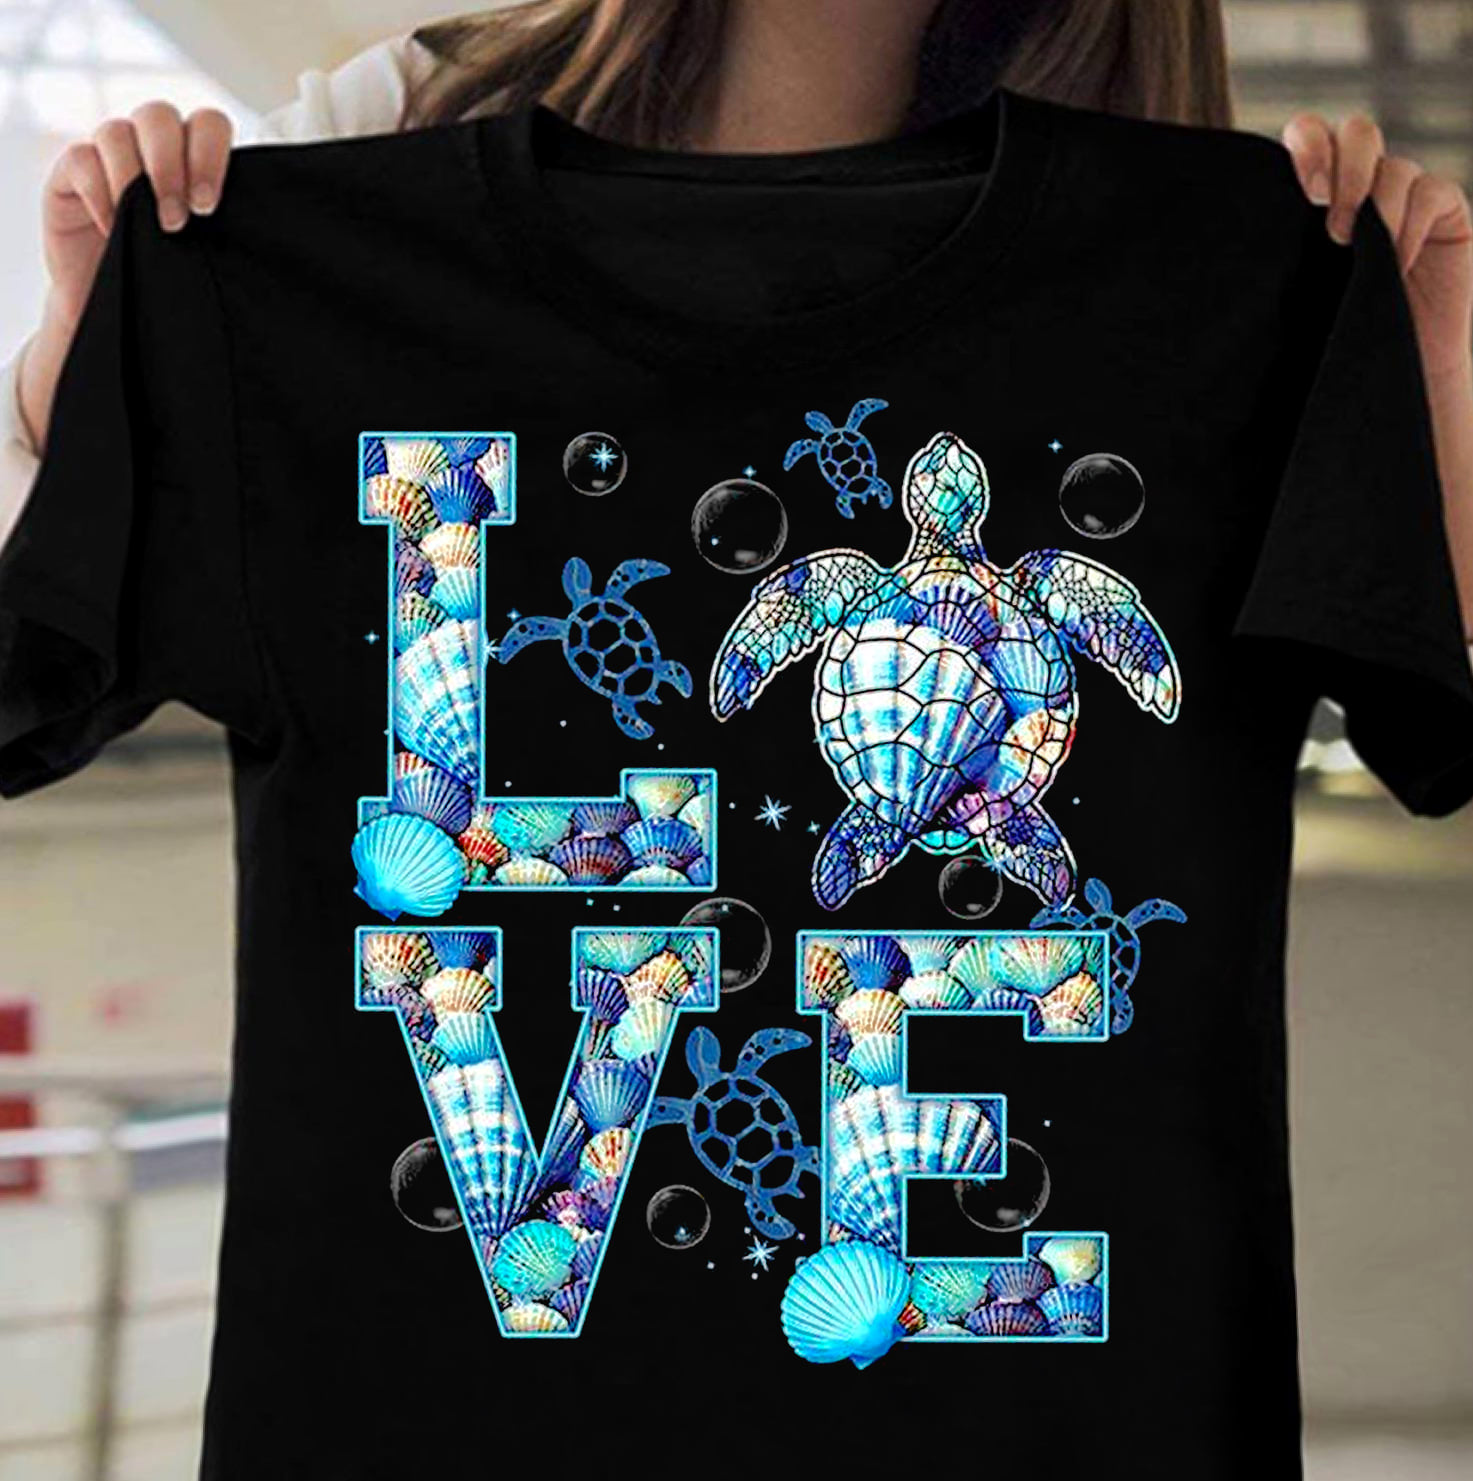 Sea Turtle – Turtle Lover, Gifts for girls love turtles